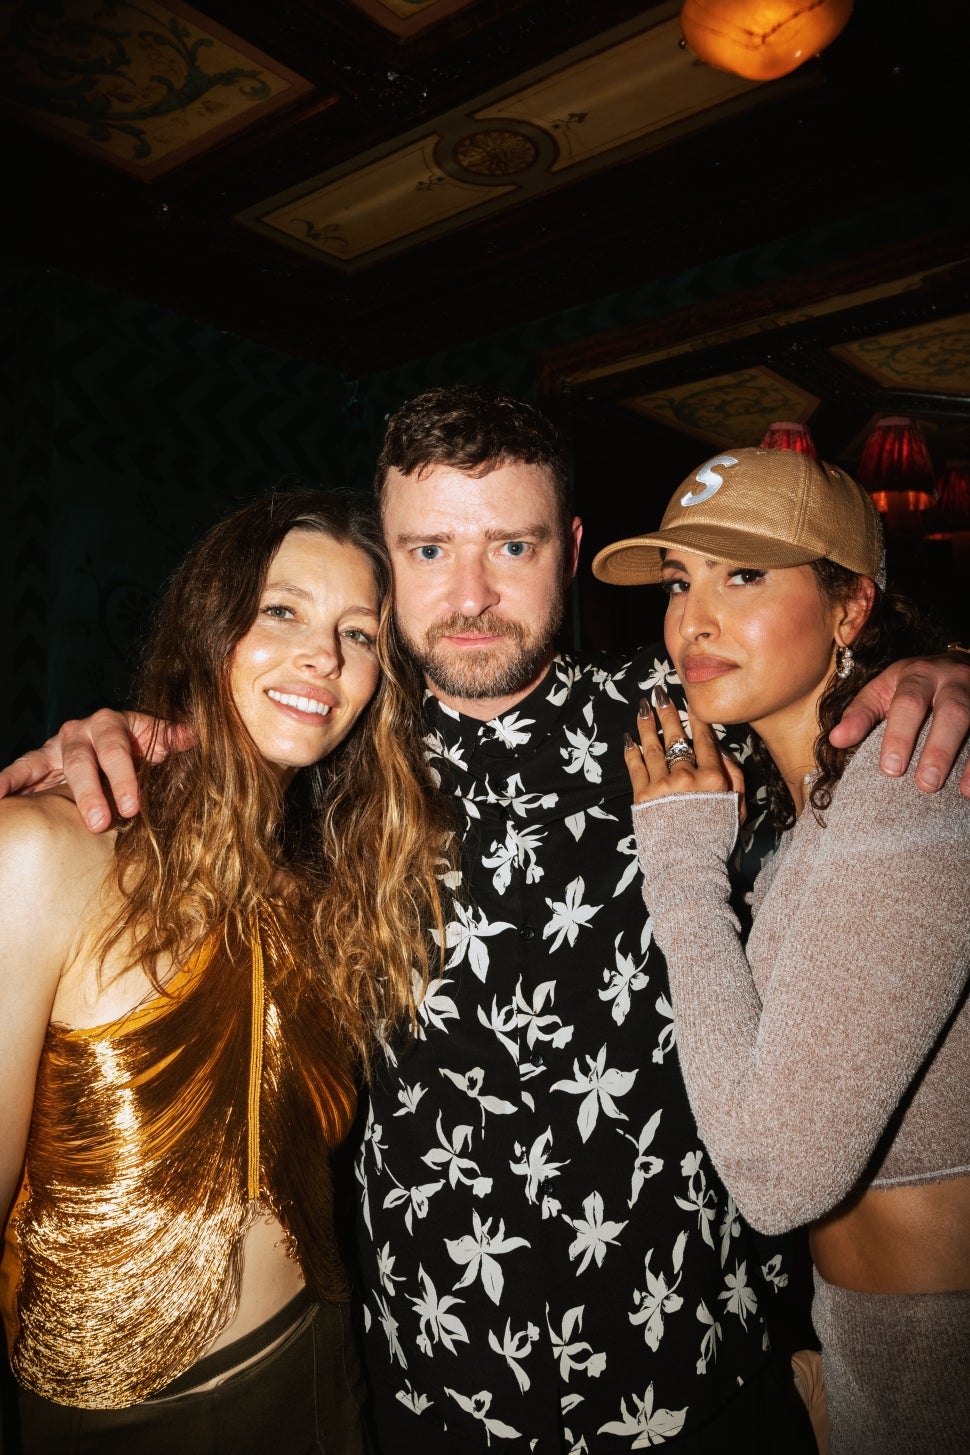 “Justin Timberlake, Jessica Biel and Snoh Aalegra celebrate at SaadiQ Paris Fashion week pop-up party by MADE Nightlife at L’aperouse hosted by Sean Dickerson, Draya Michelle, Starino & Airbiggie”